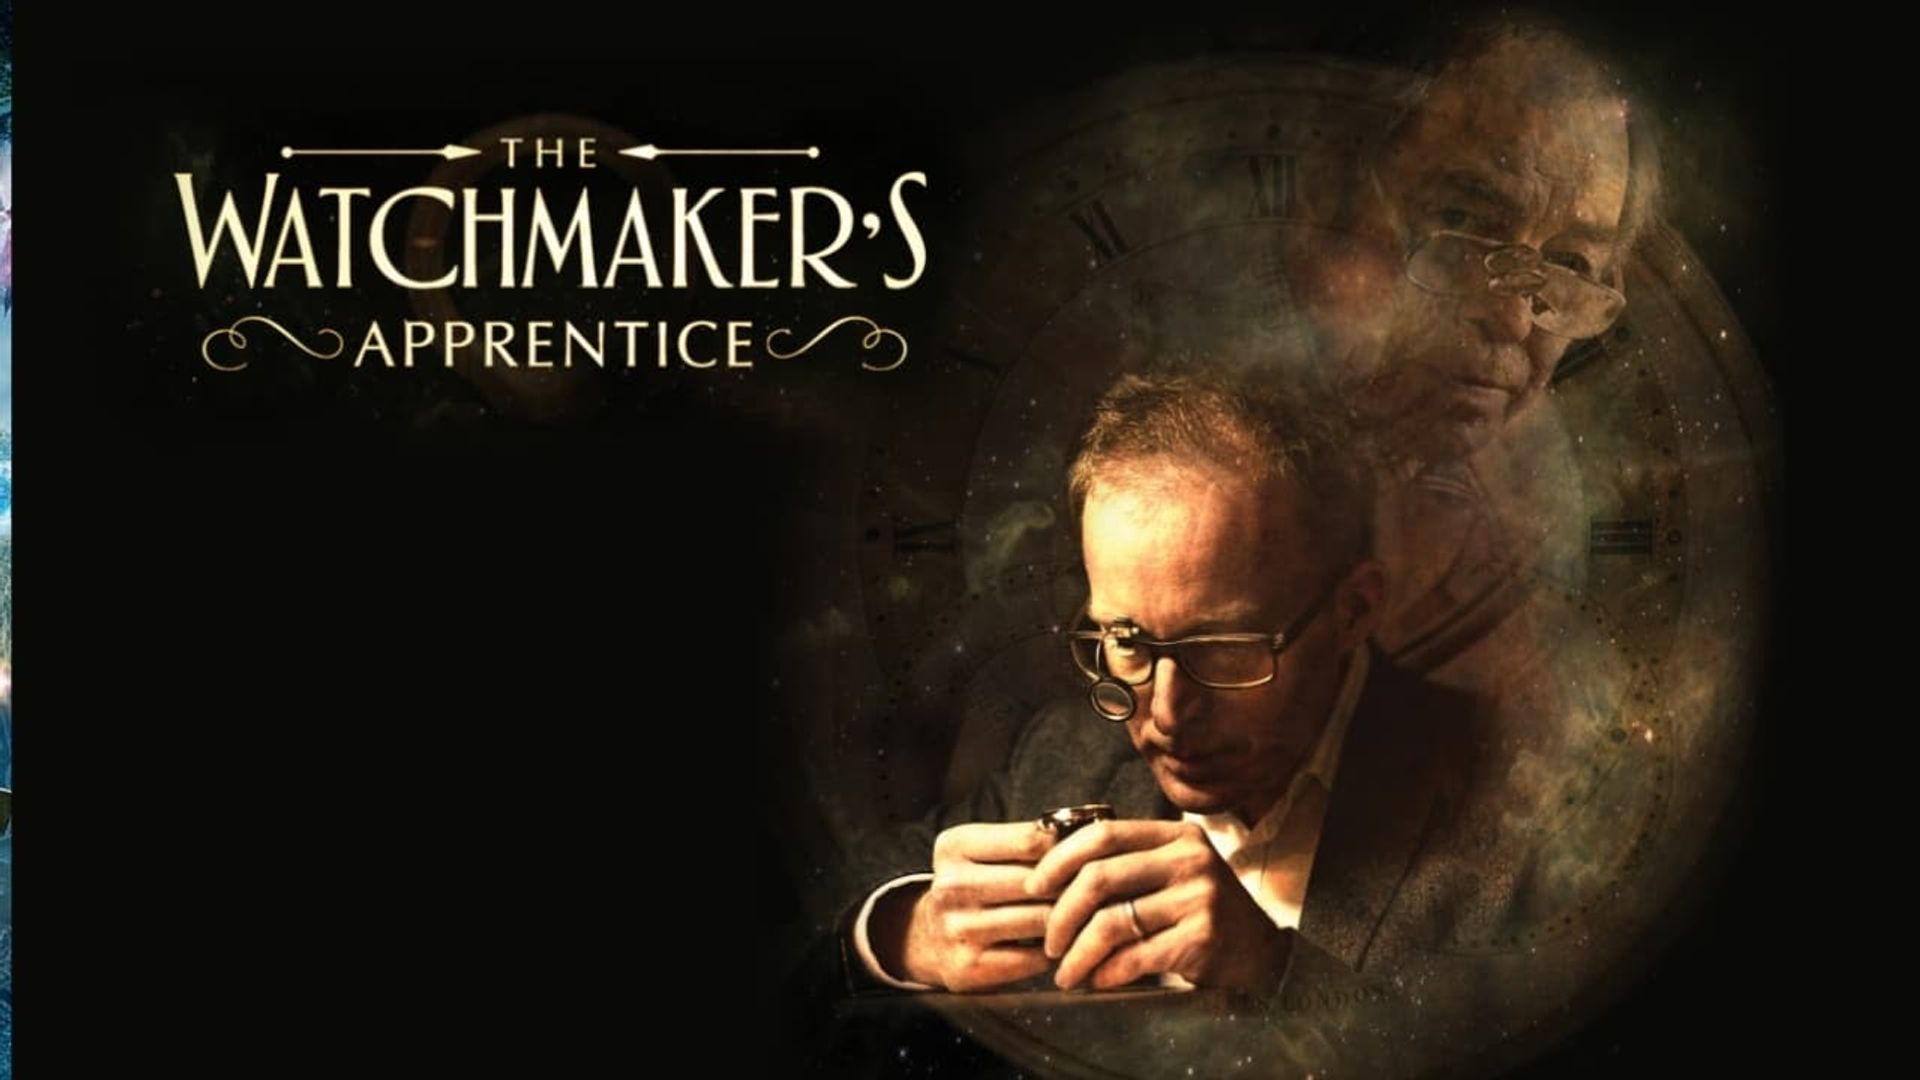 The Watchmaker's Apprentice background